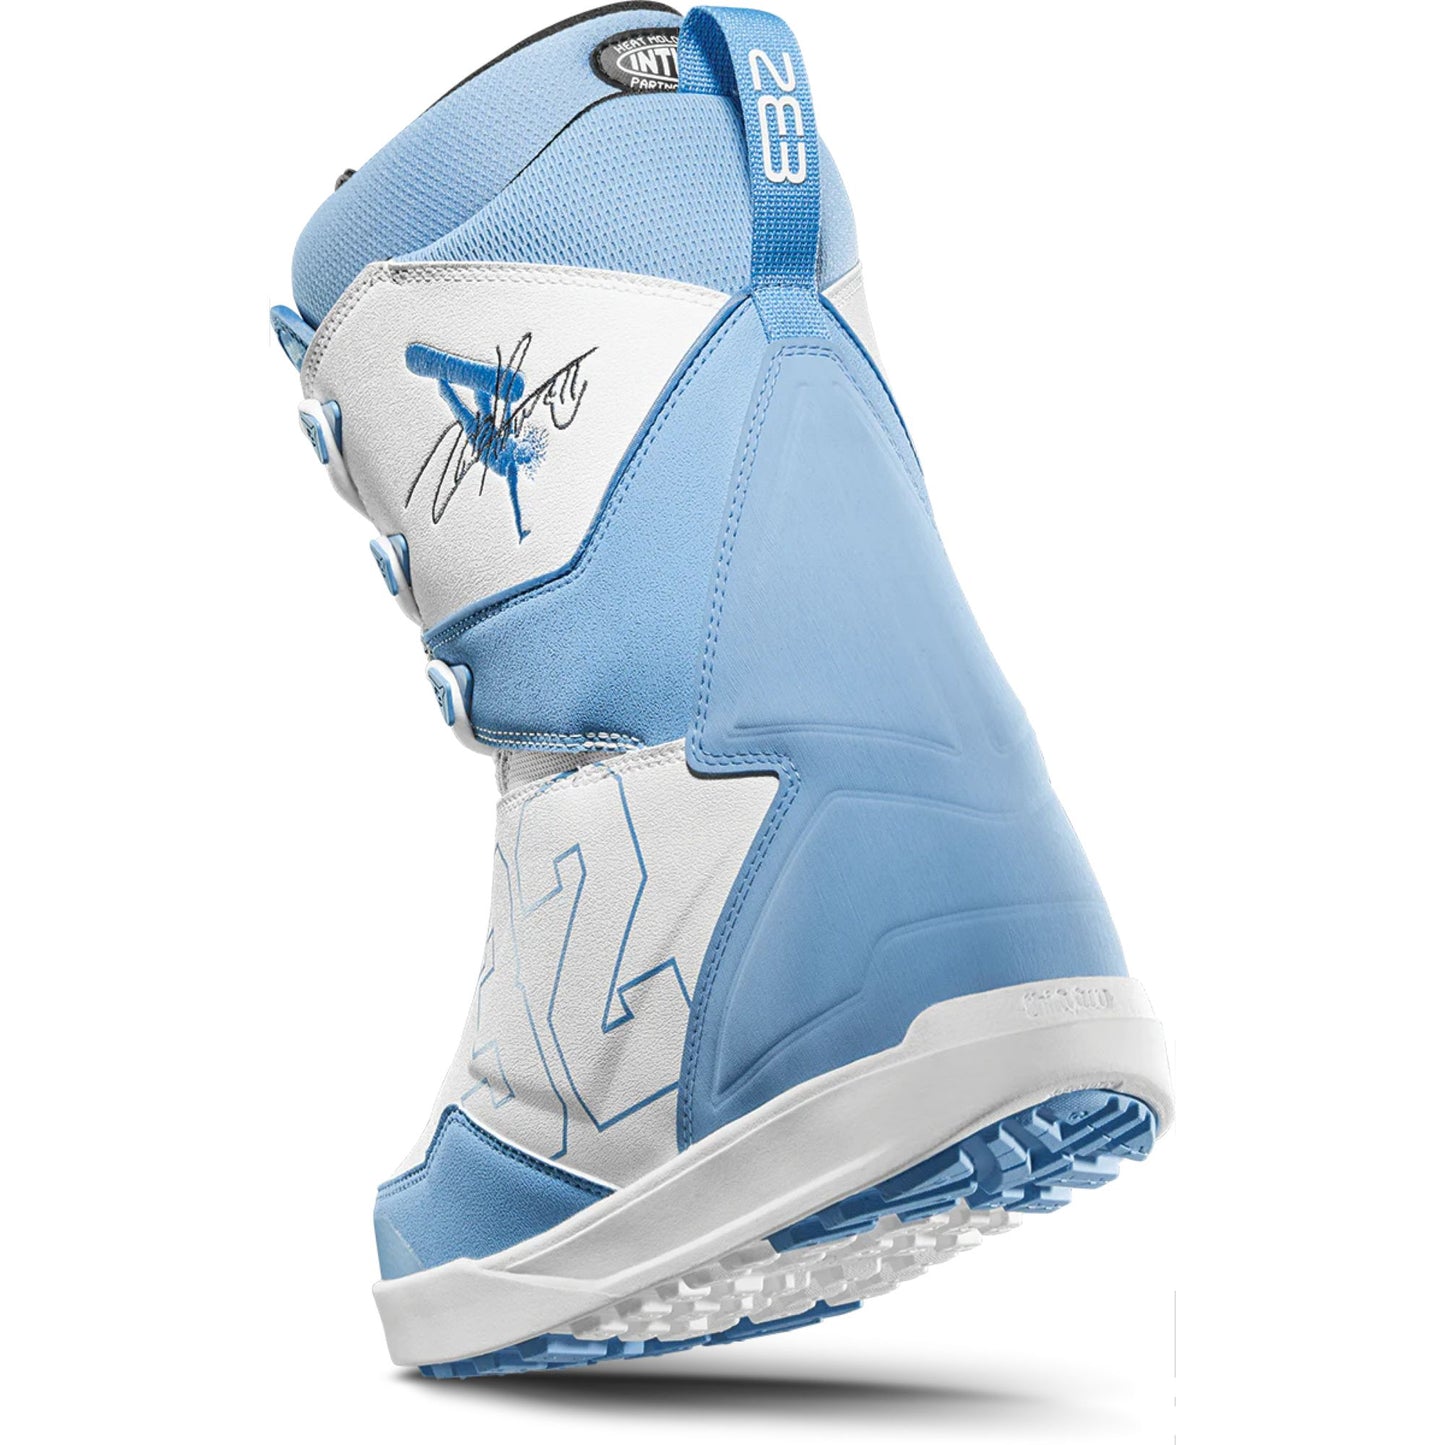 ThirtyTwo Lashed Powell Snowboard Boots Blue White Snowboard Boots